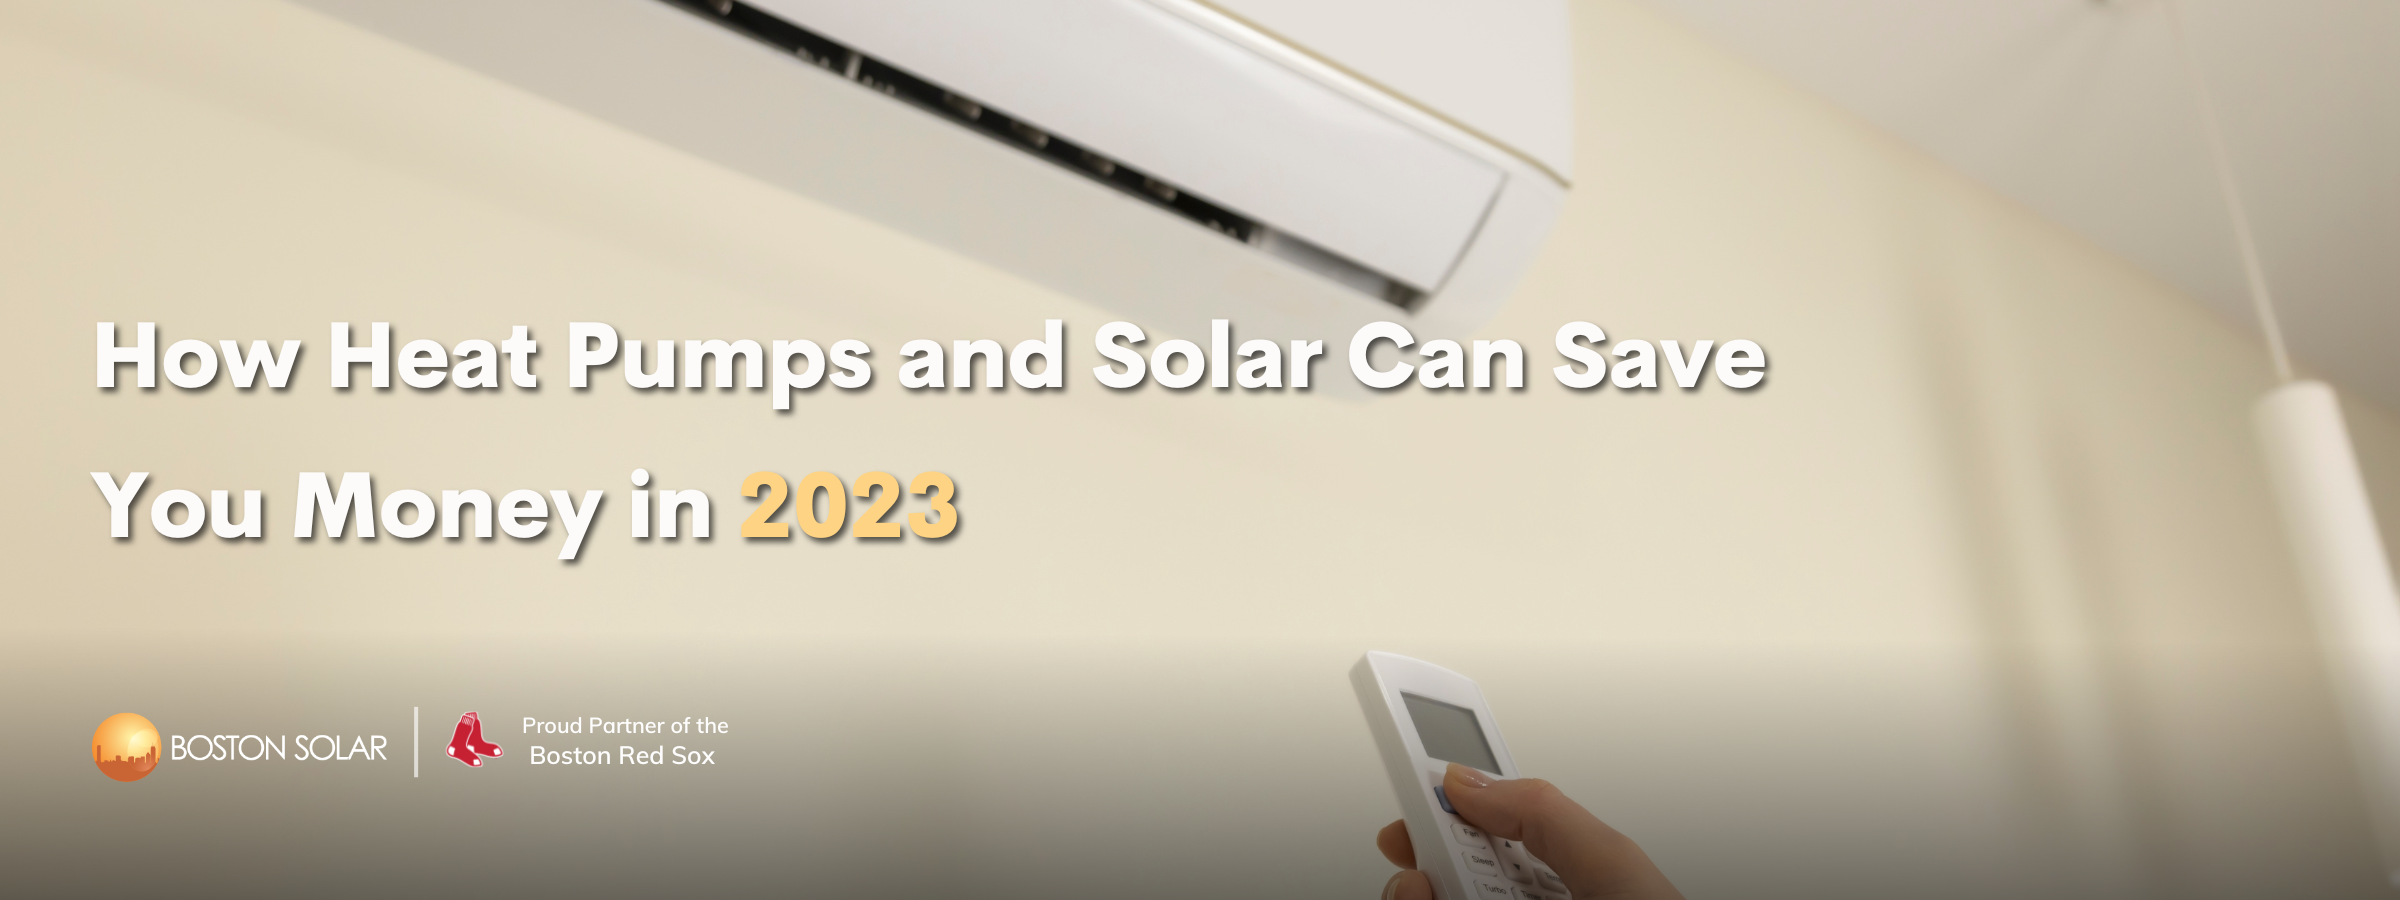 How Heat Pumps and Solar Can Save You Money in 2023